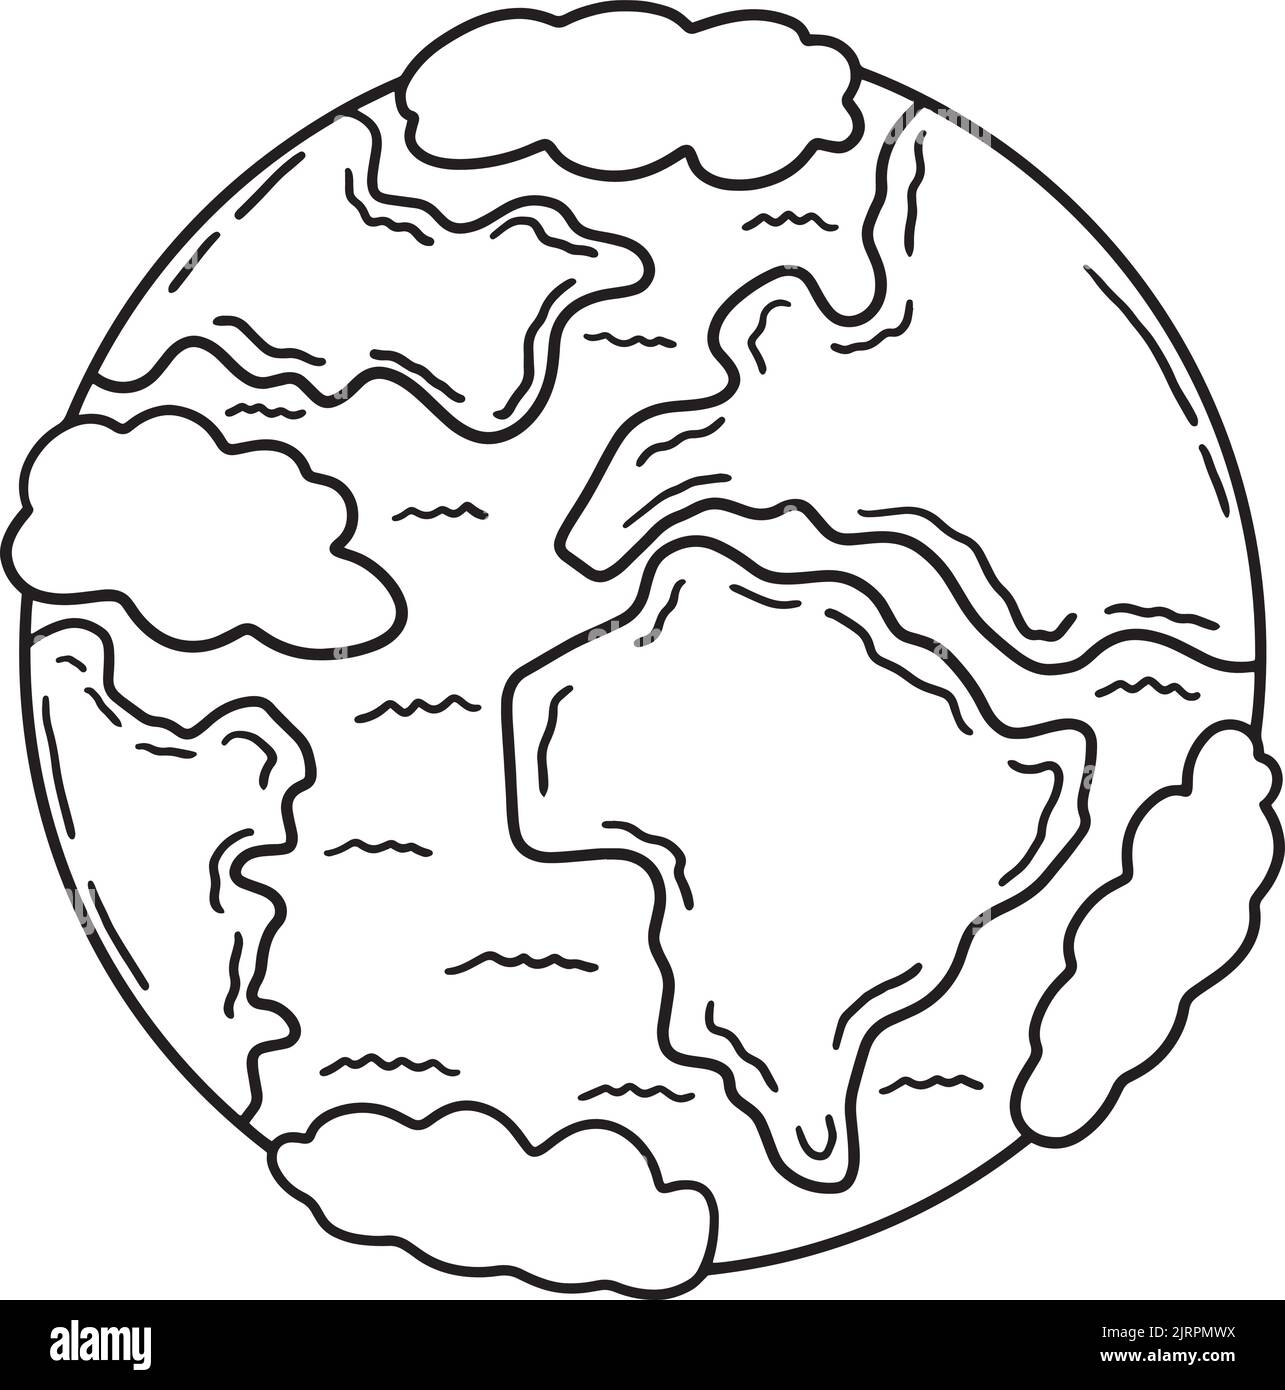 Planet Earth Isolated Coloring Page für Kinder Stock Vektor